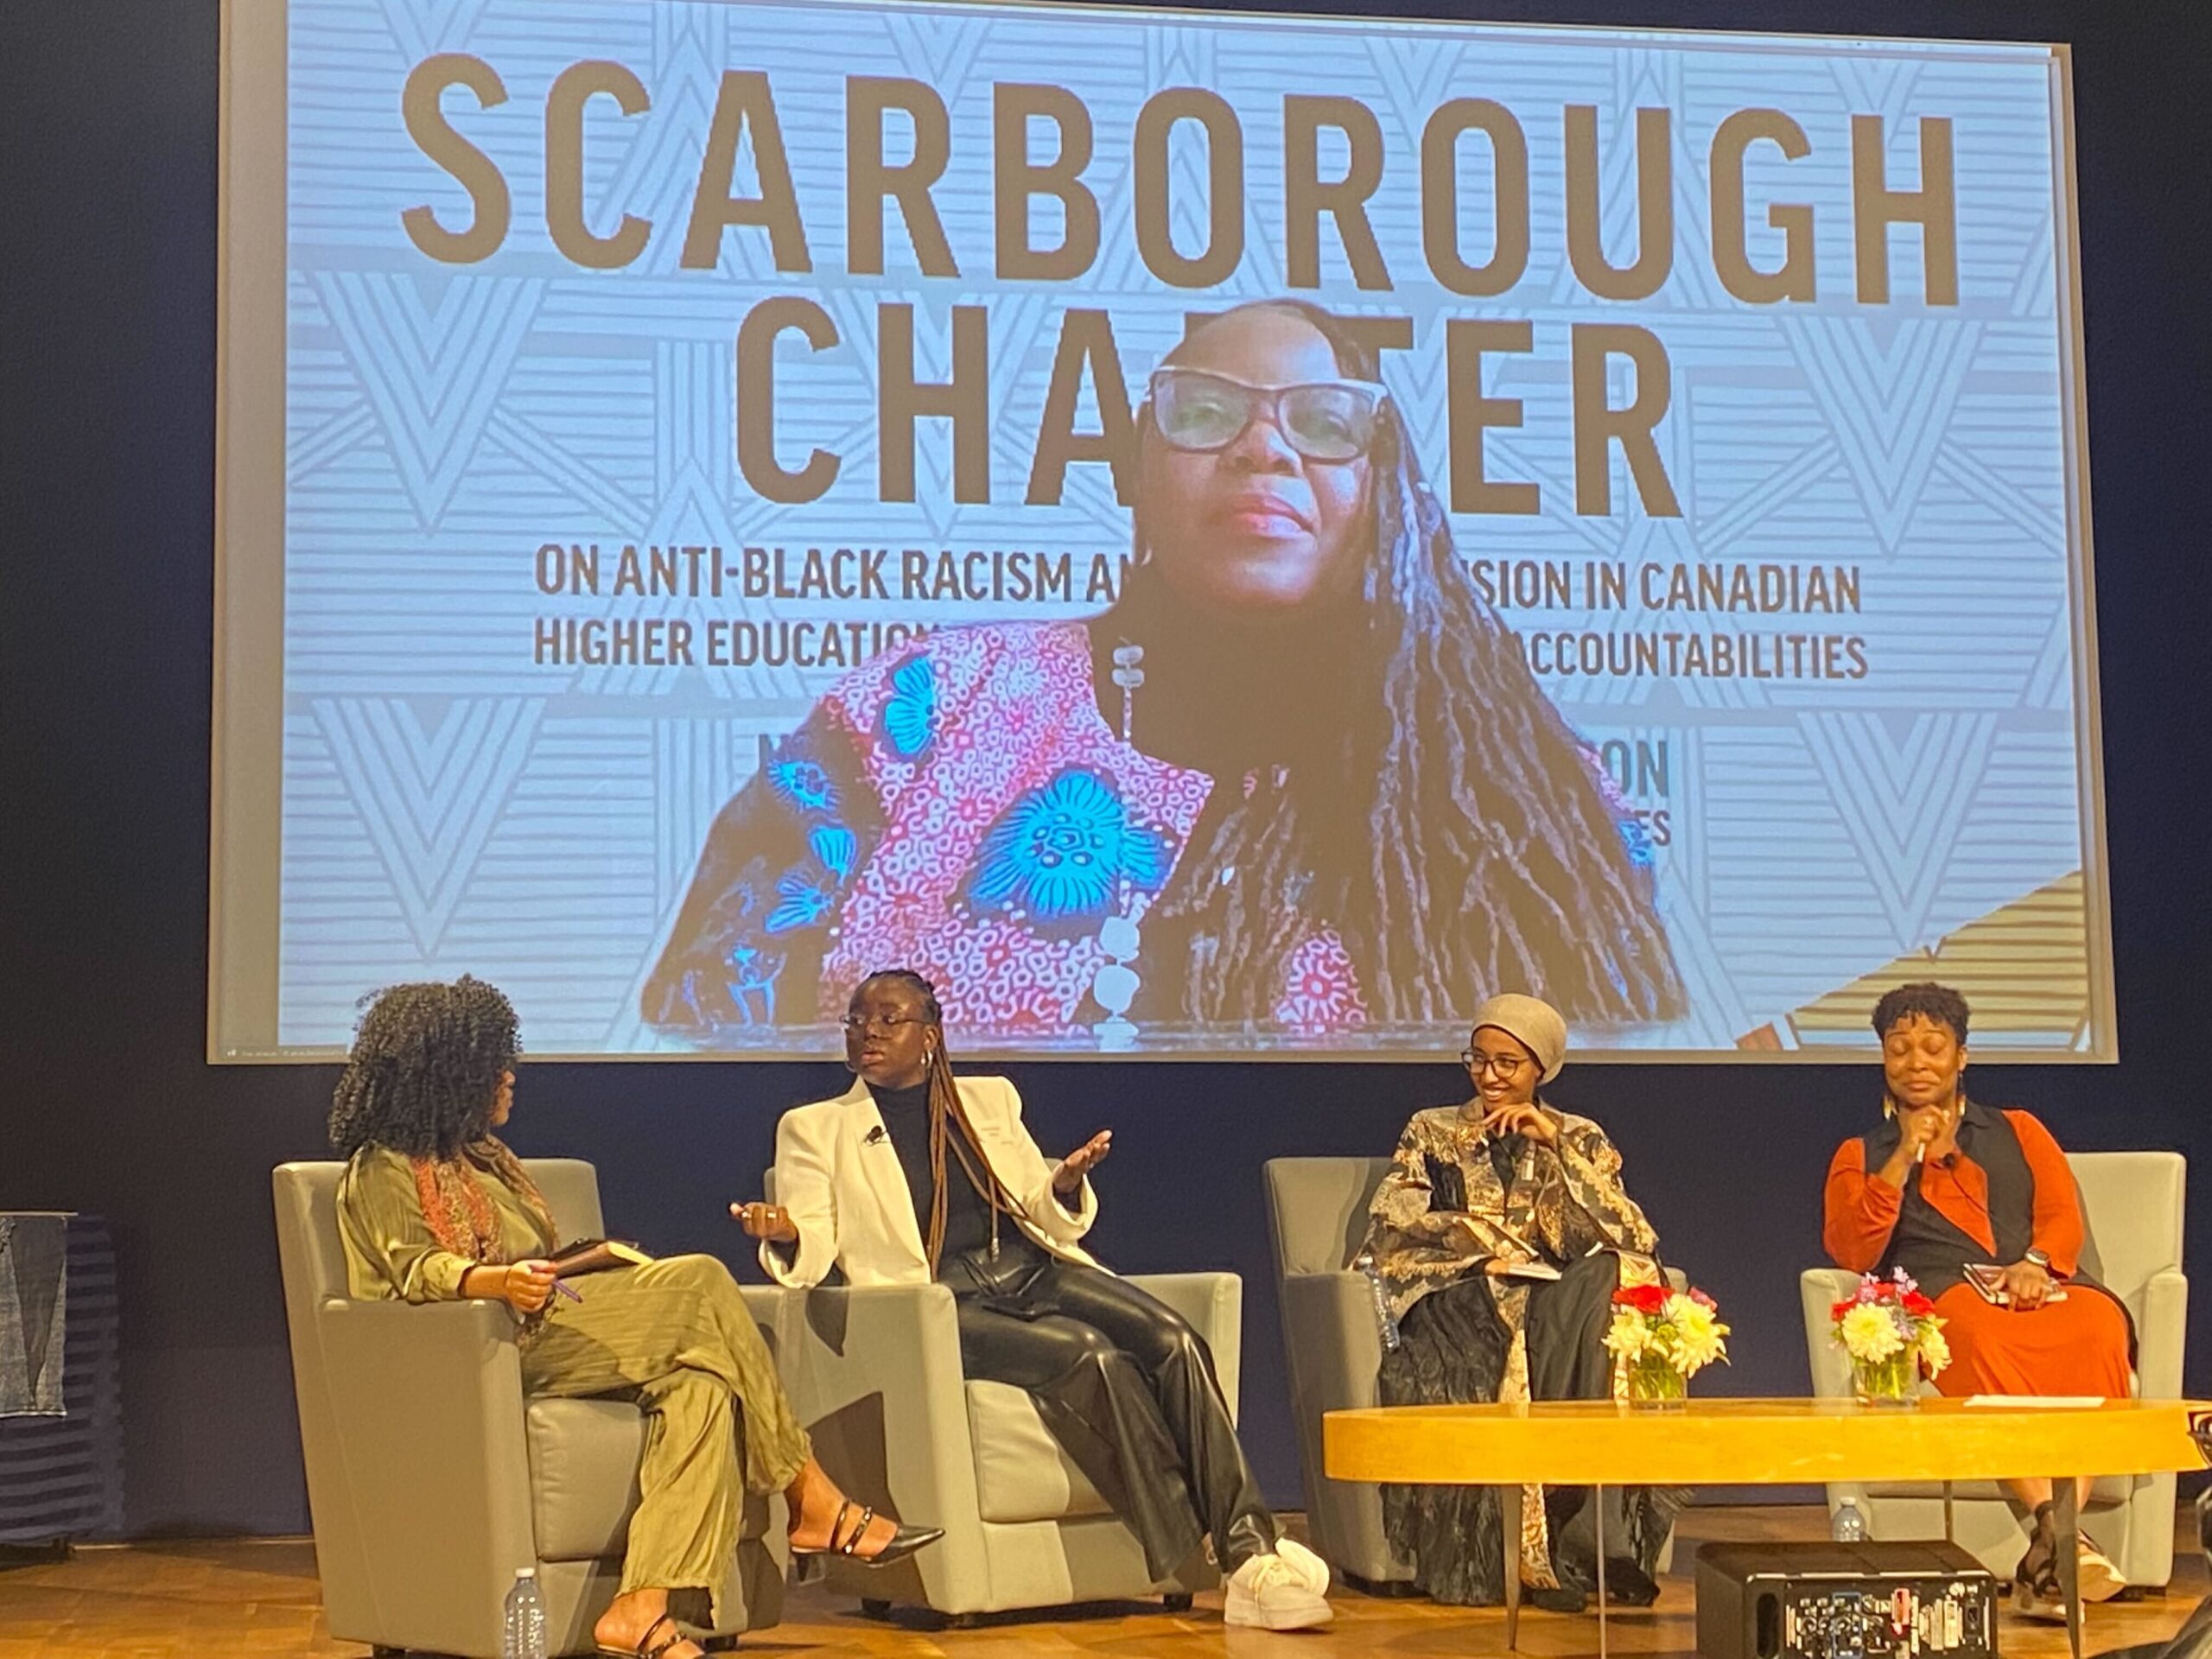 The photo is of four Black panellists engaging in conversation onstage. Behind them is a screen that reads Scarborough charter. The screen also has another panelist joining in virtually.